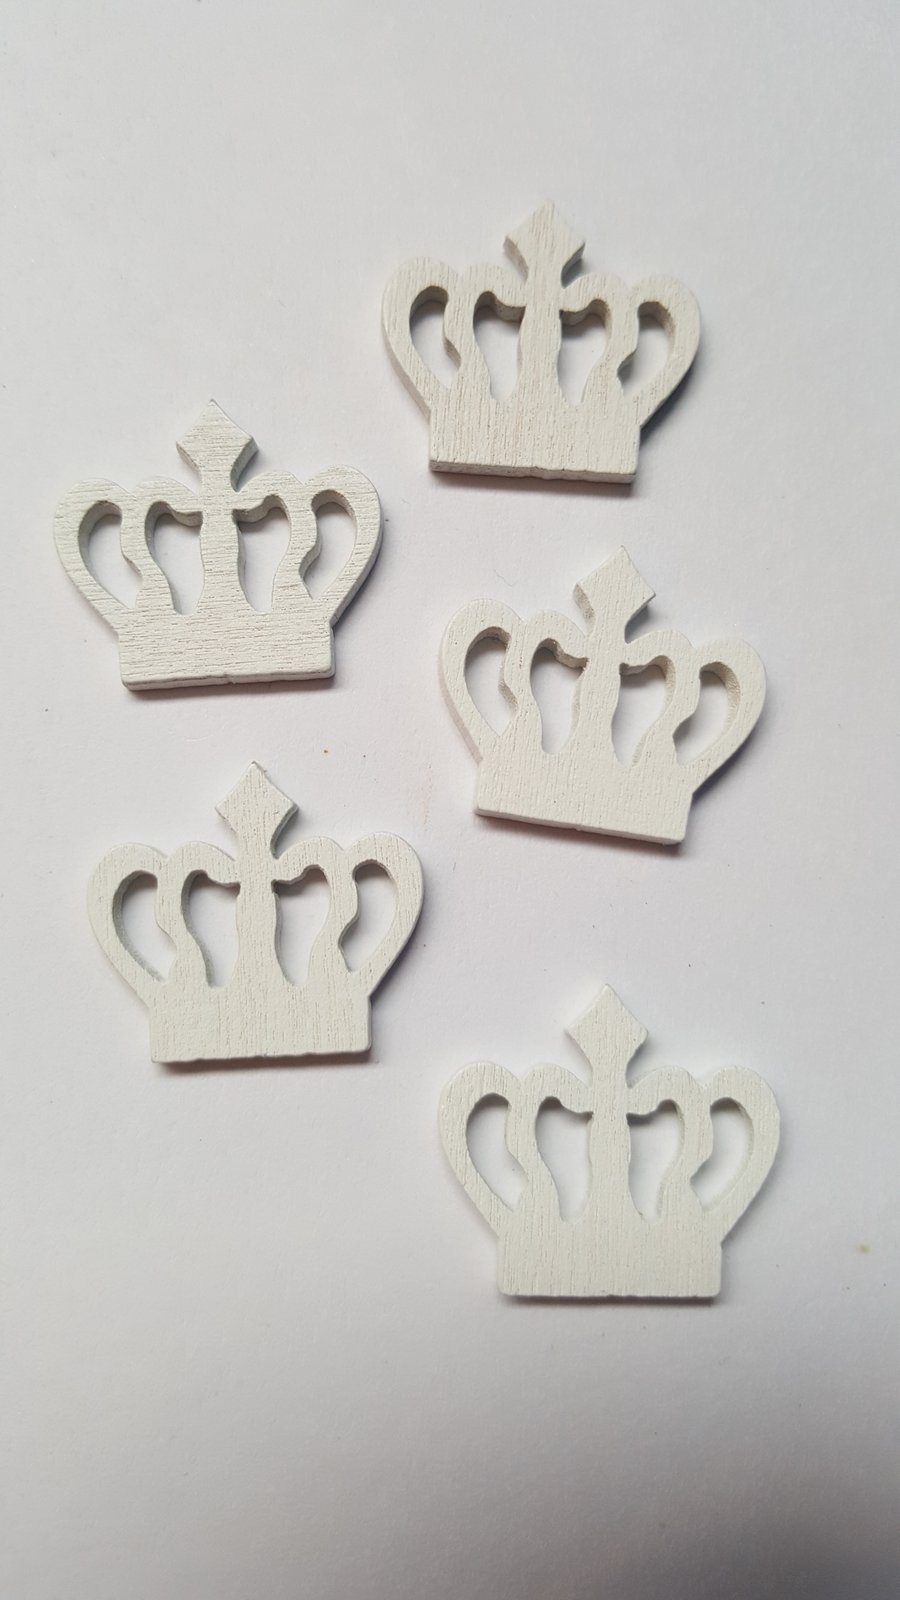 10 x Painted Wooden Shapes - 23mm - Crown - White 